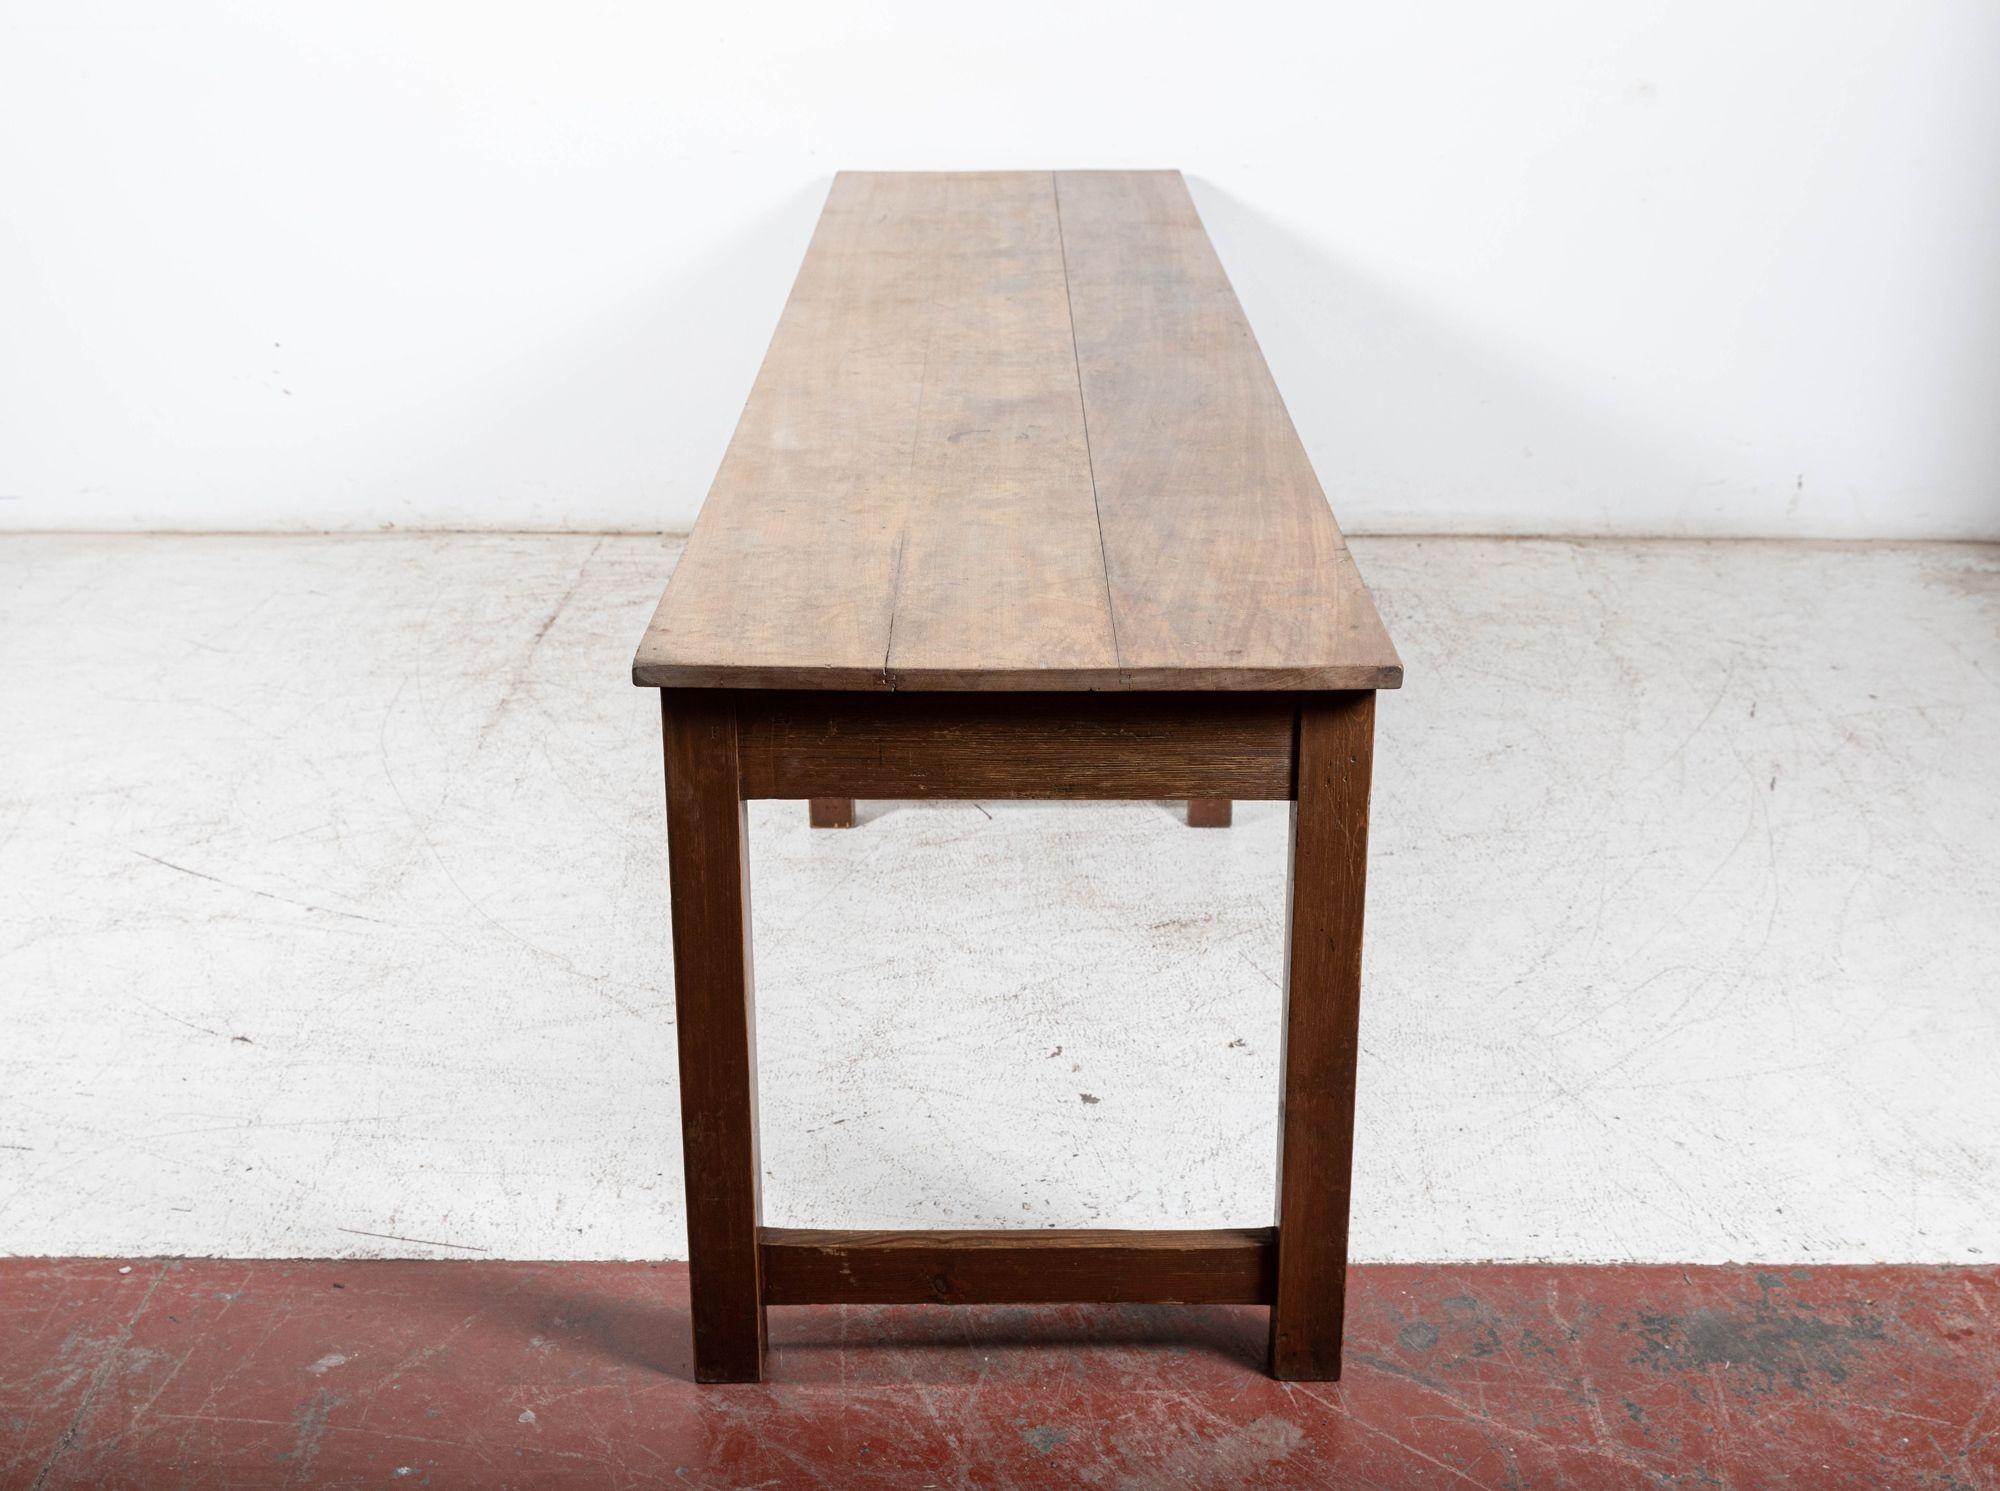 Monumental Scottish Mahogany Top Art Refectory Table For Sale 2